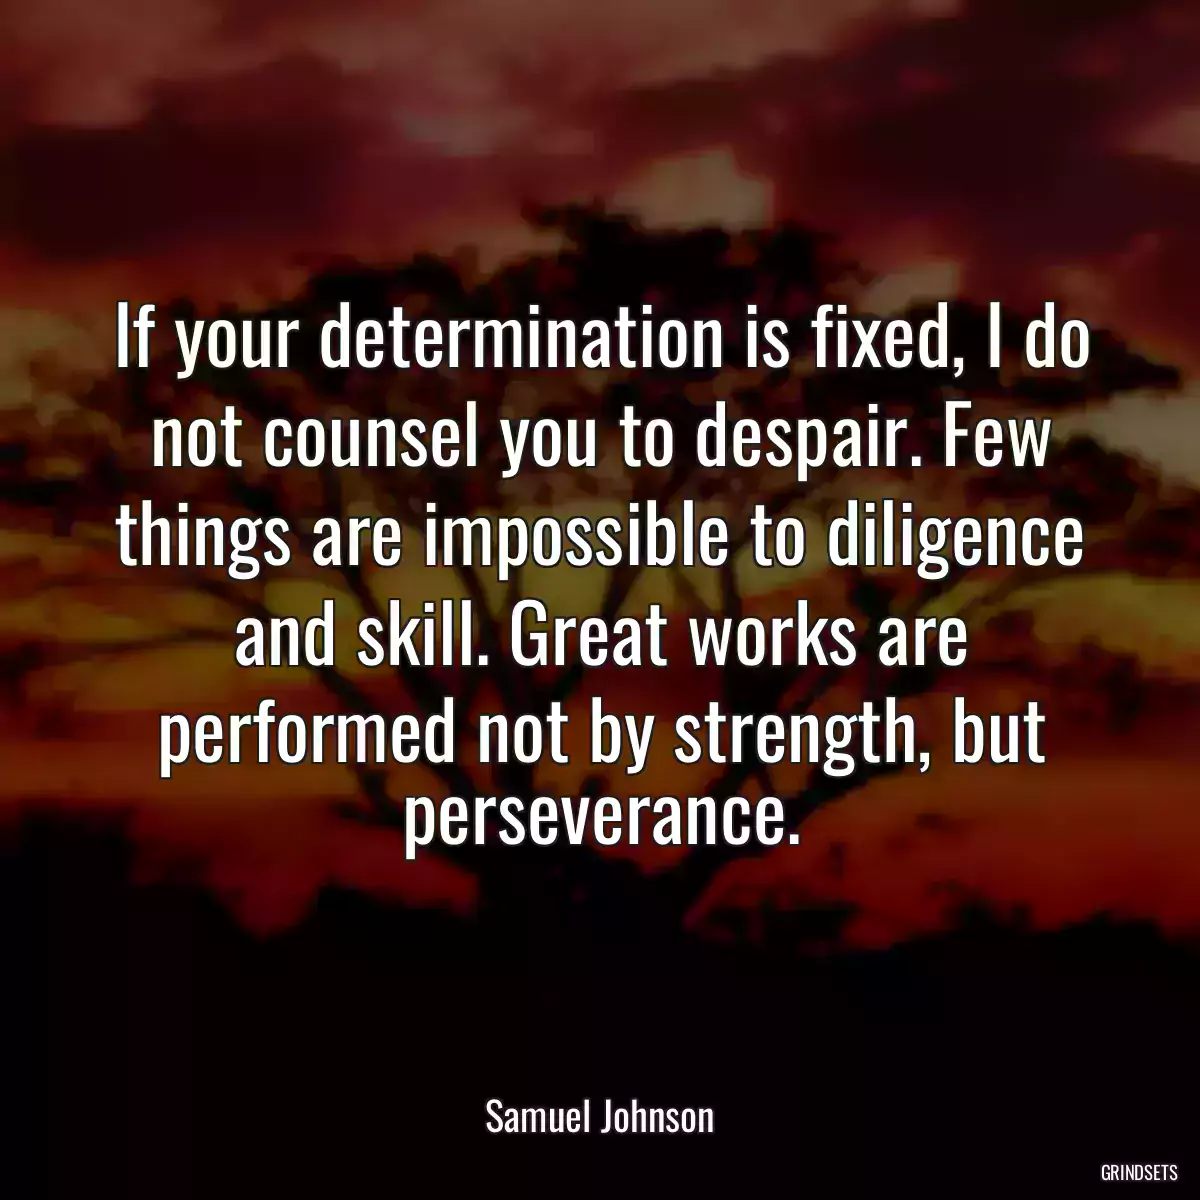 If your determination is fixed, I do not counsel you to despair. Few things are impossible to diligence and skill. Great works are performed not by strength, but perseverance.